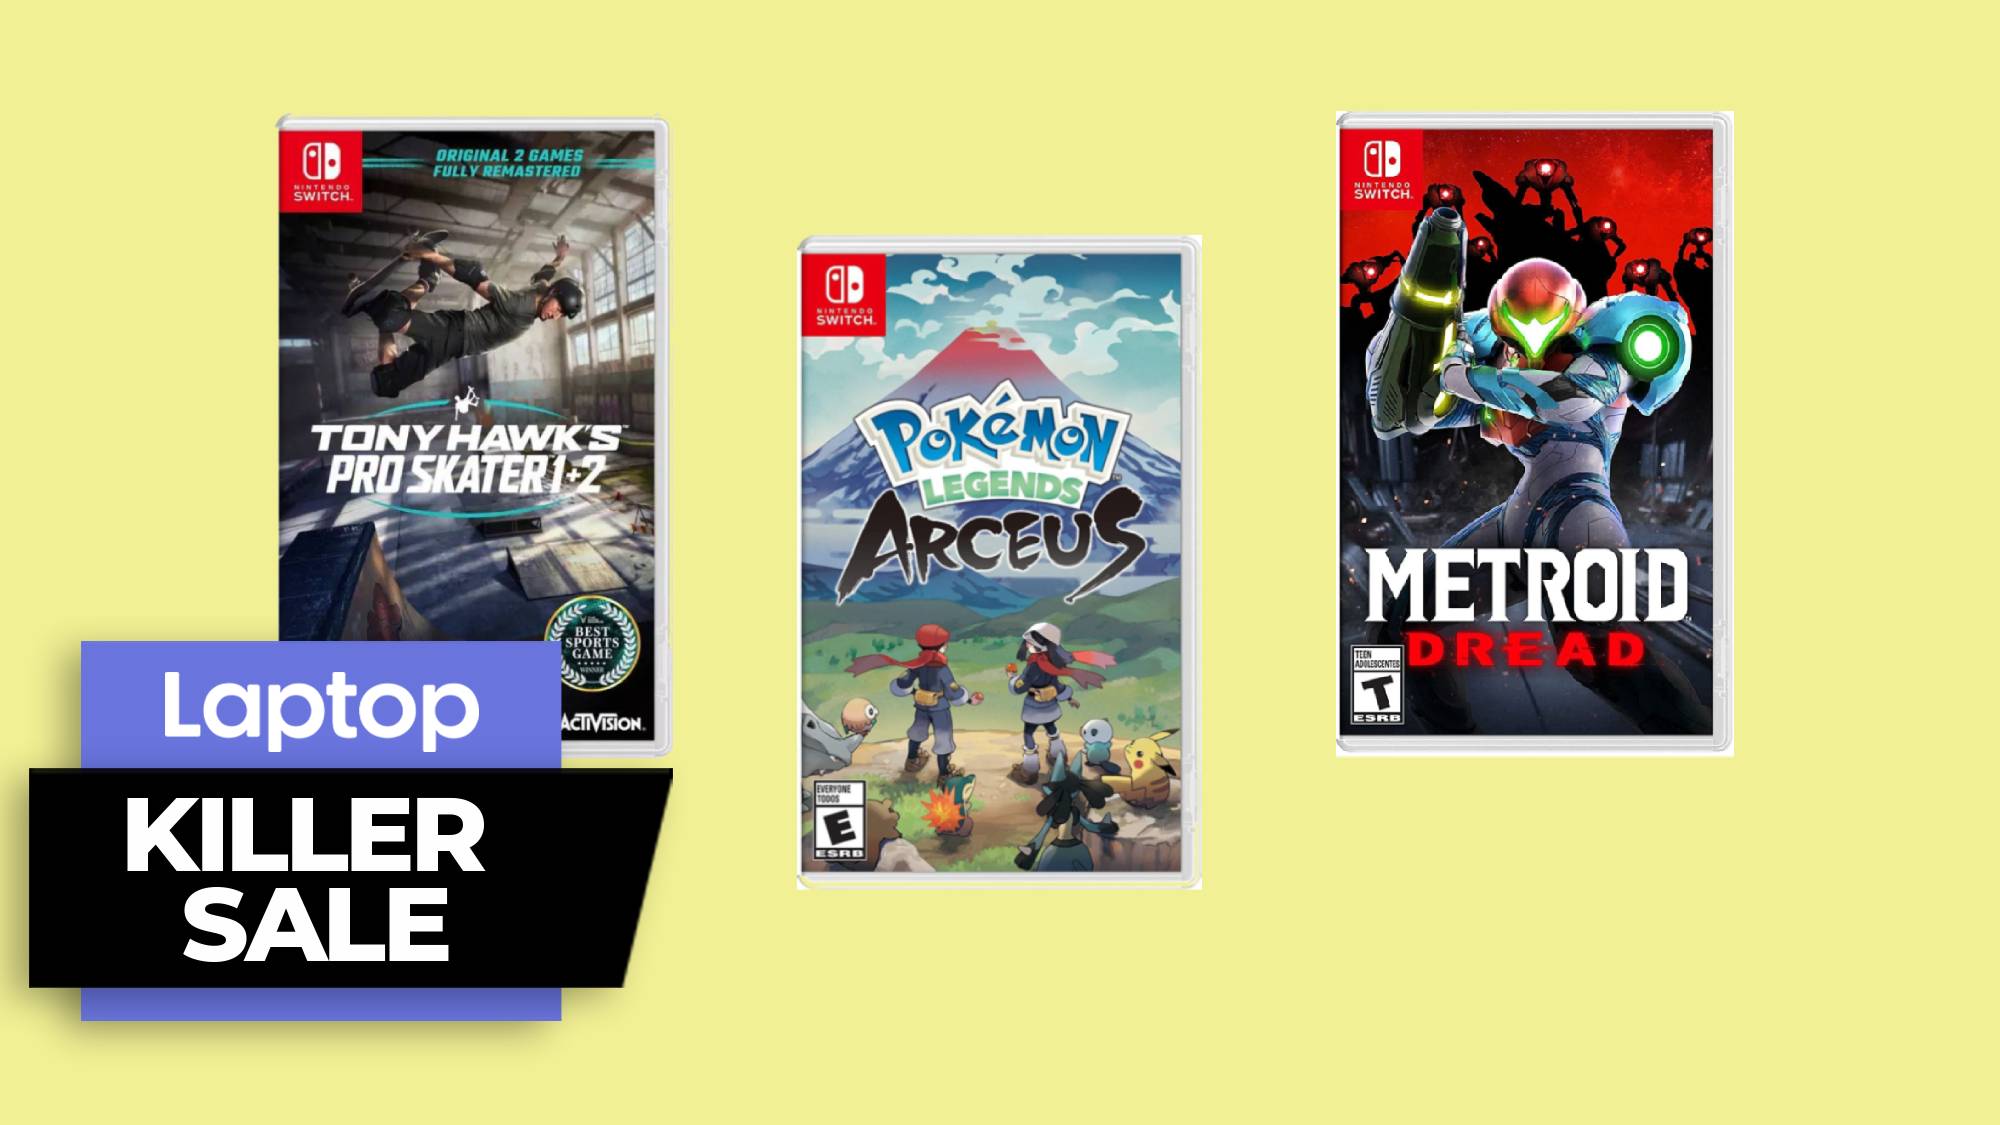 Get one of the best Nintendo Switch games for less at